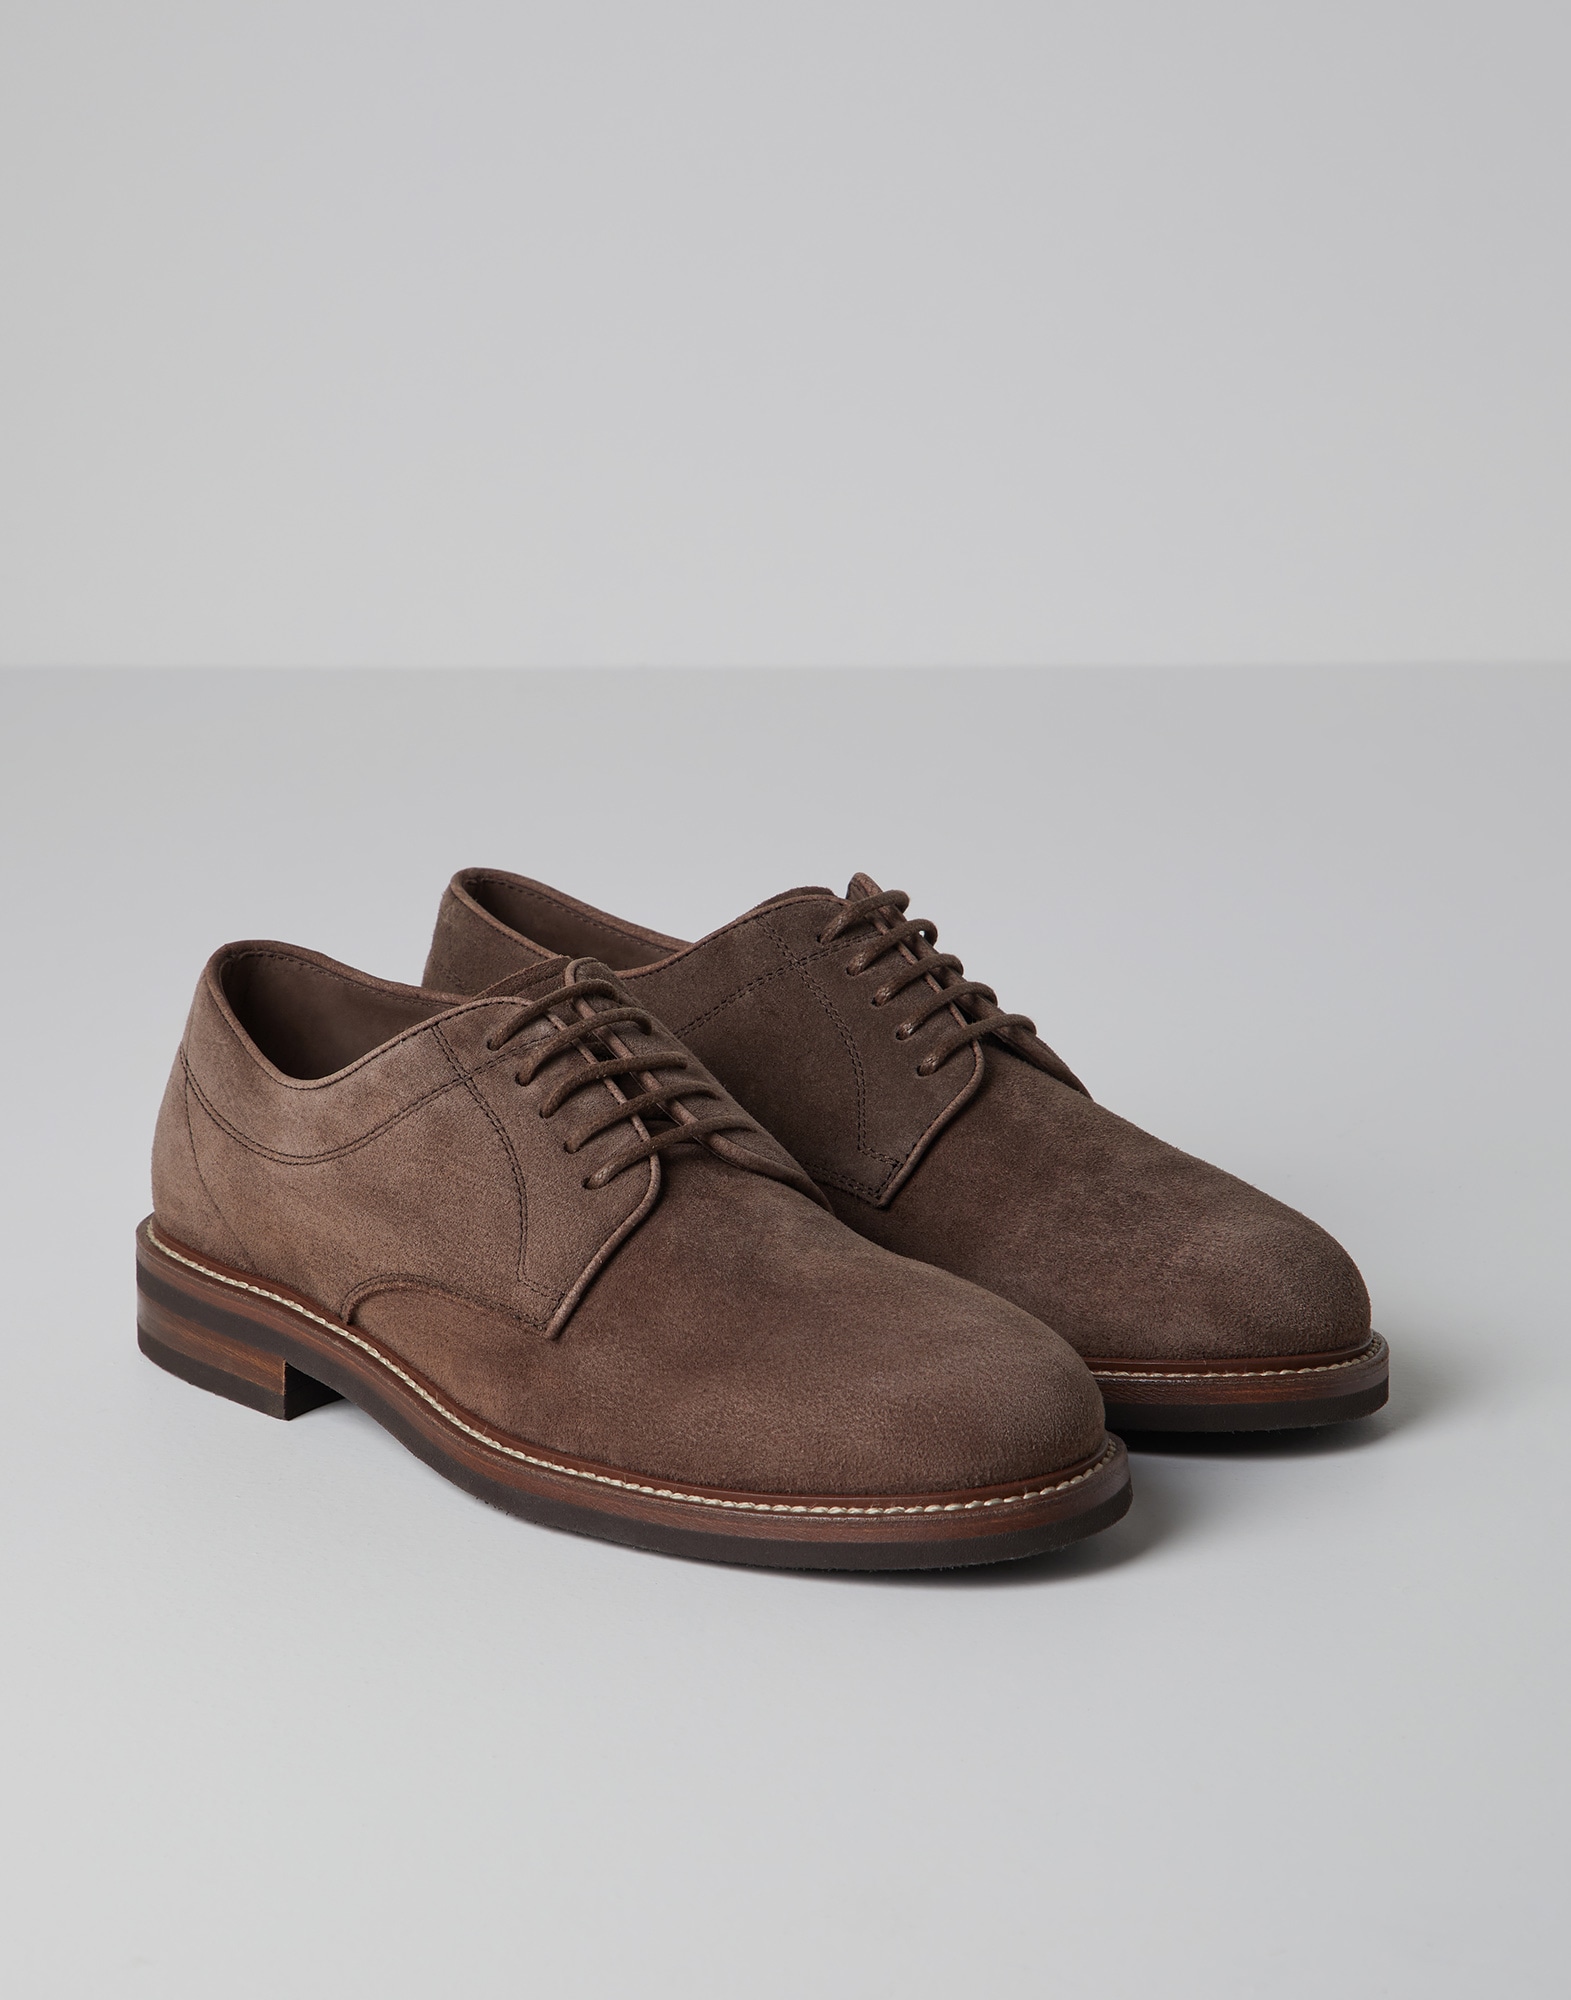 BRUNELLO CUCINELLI◇レースアップシューズ - www.shape-obstacles.com